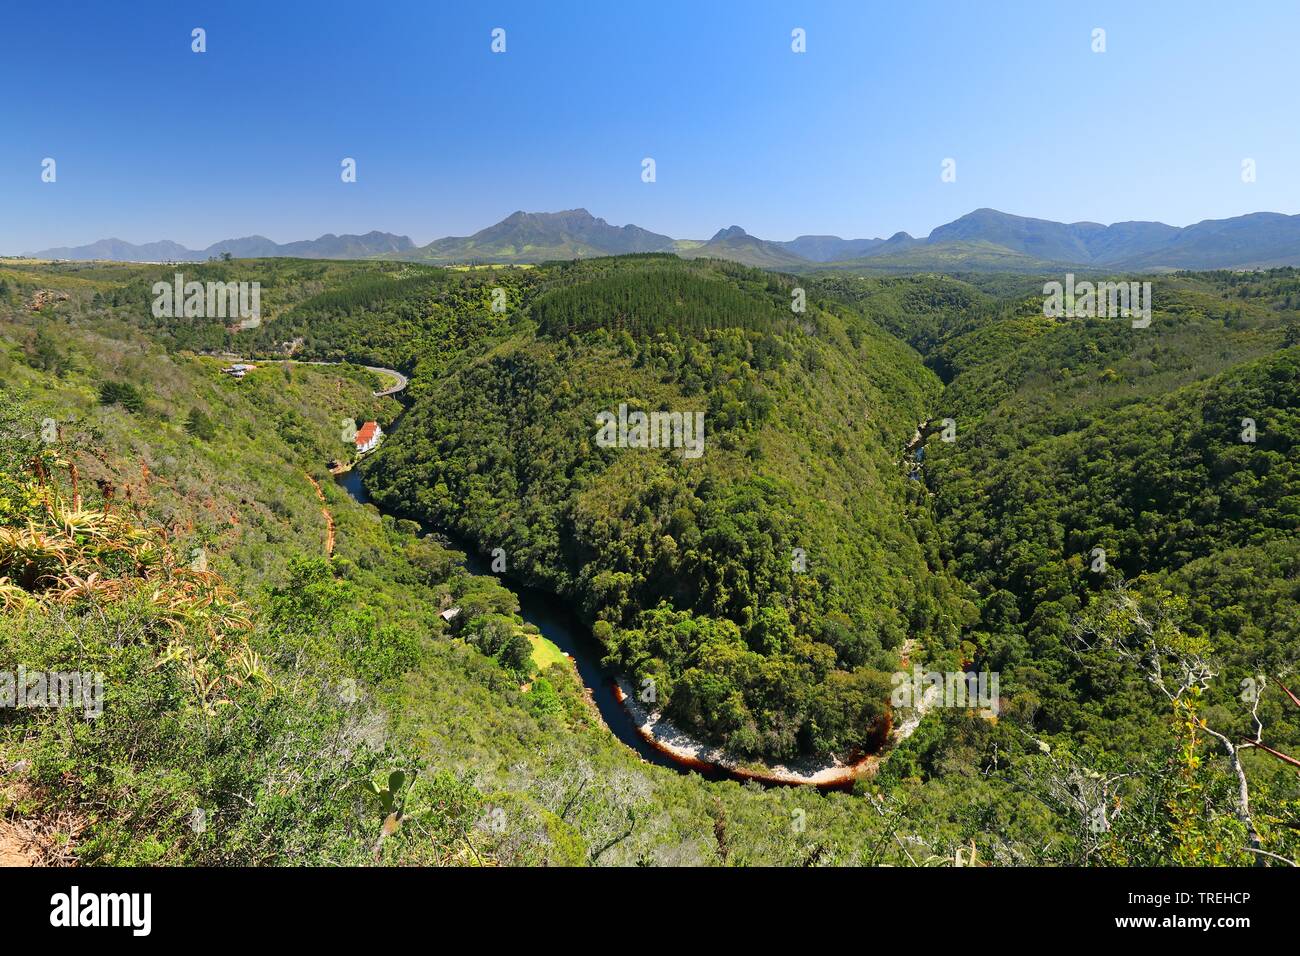 Map of Africa, Kaaimansrivier Valley, South Africa, Western Cape, Wilderness National Park Stock Photo